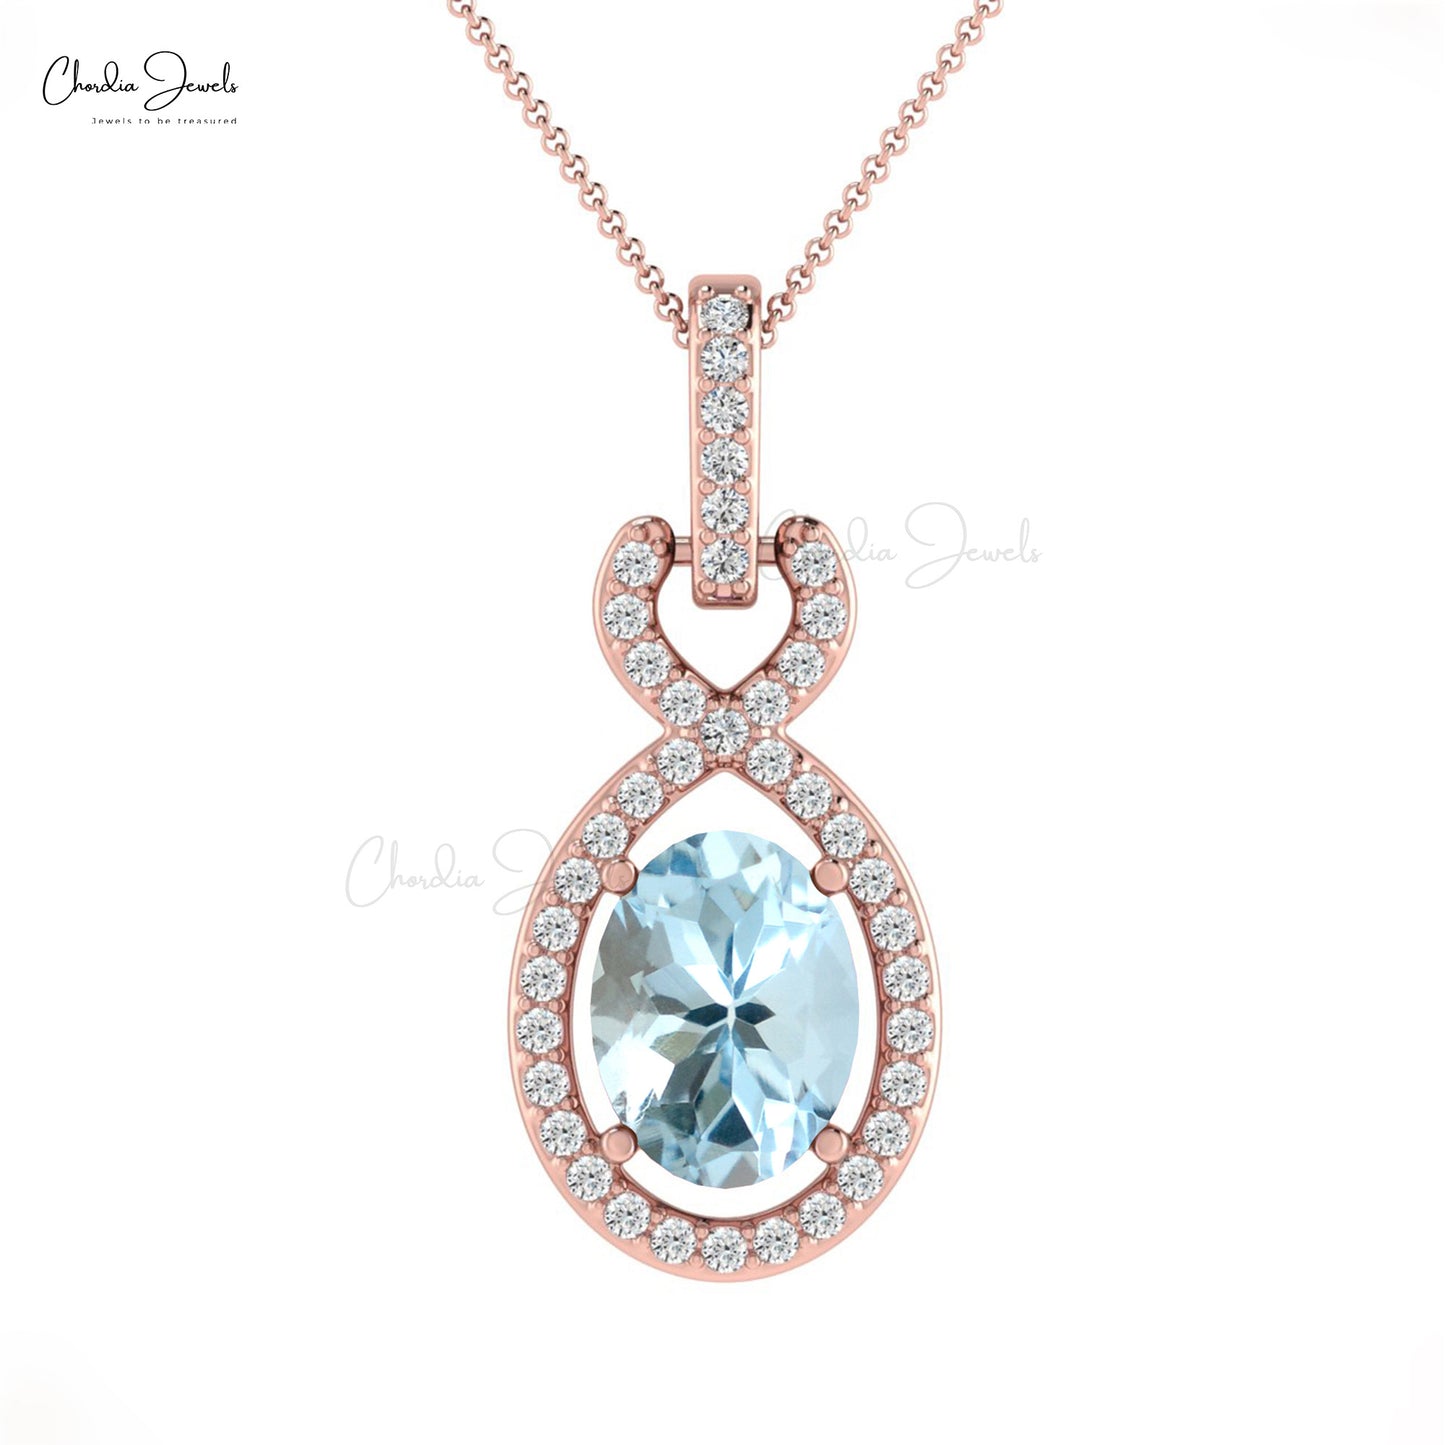 Load image into Gallery viewer, Handmade Vintage Stylish Simple Pendant Authentic Aquamarine Gemstone Halo Pendant Necklace Studded With White Diamond Pure 14k Gold Dainty Jewelry For Gift
